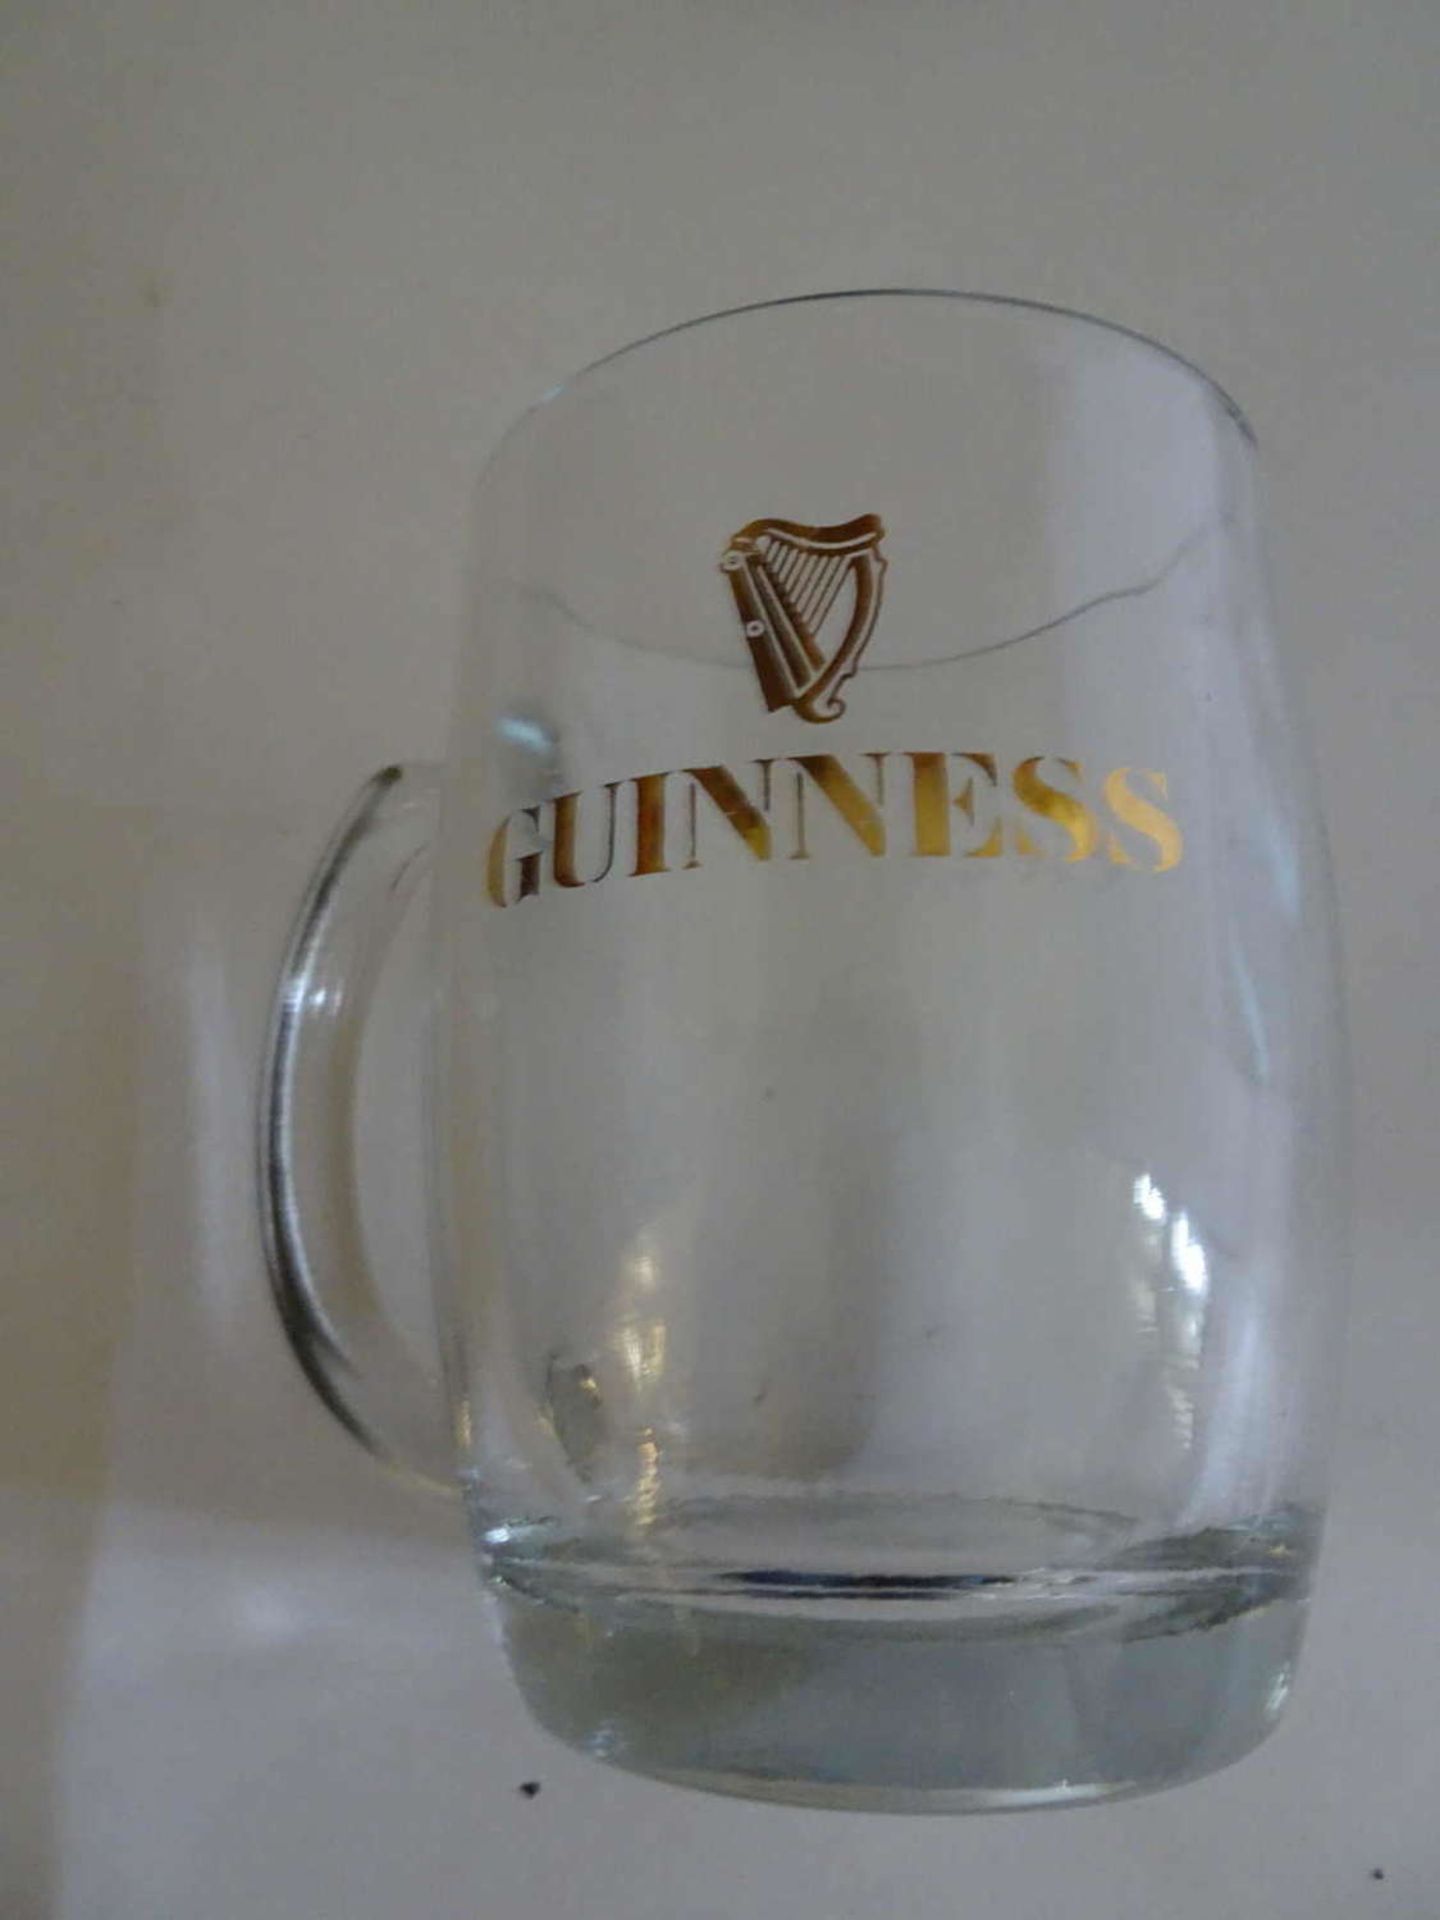 5 older Guiness glasses for the beer connoisseur, 0,4 ltr. Calibration mark. Good condition. - Image 2 of 2